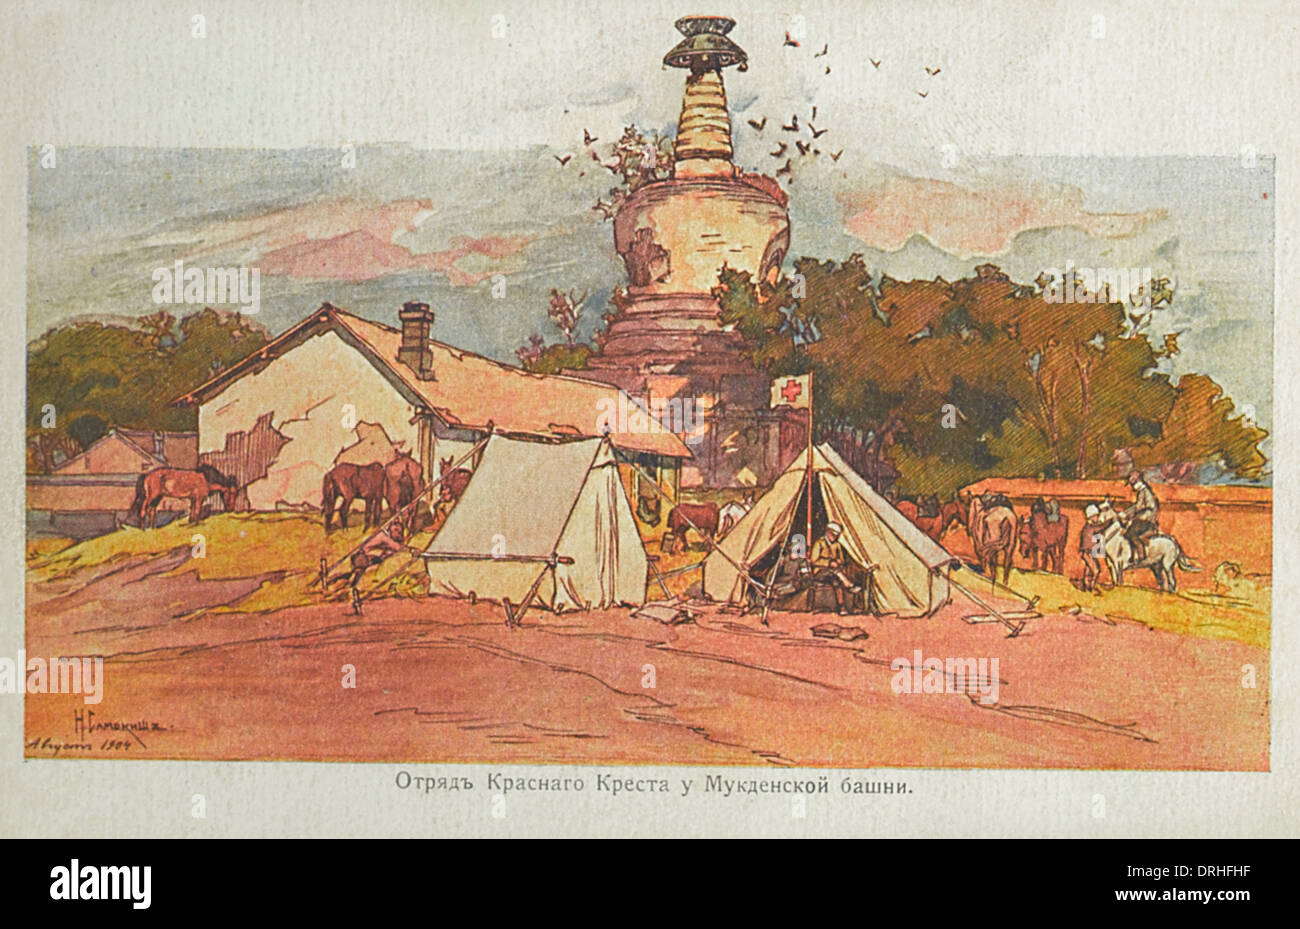 Red Cross Tents at Mukden - Russo-Japanese War Stock Photo